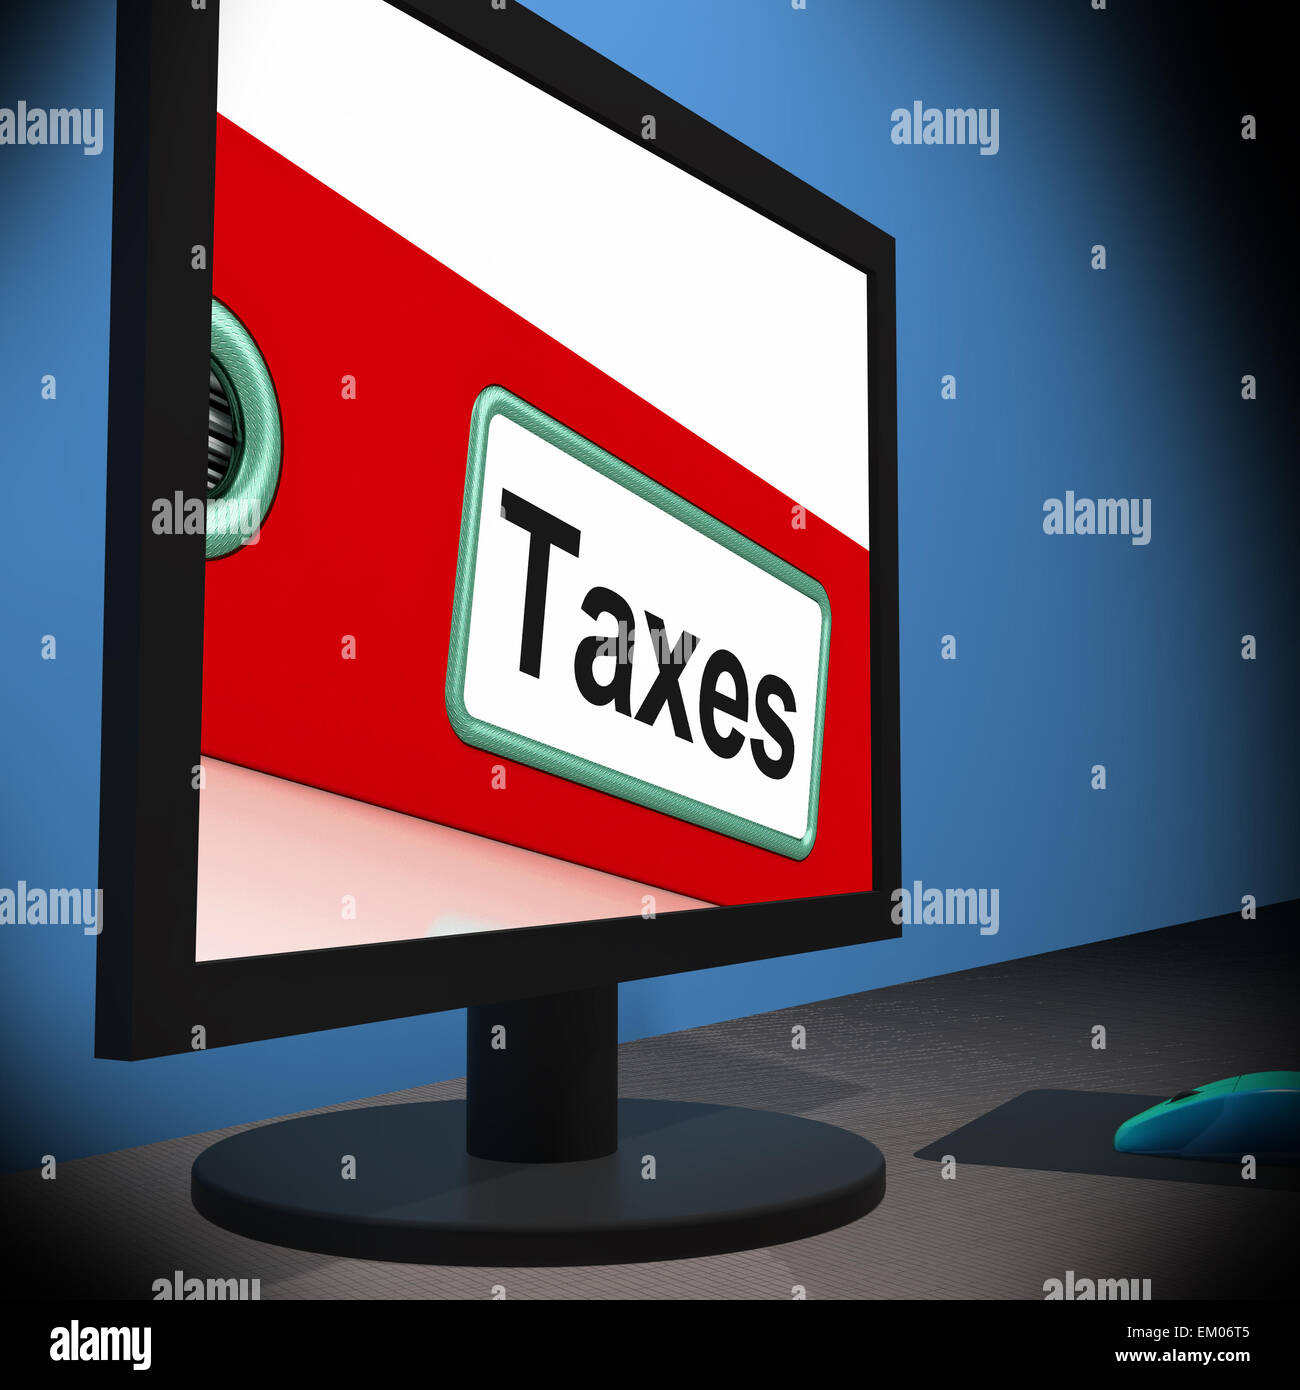 Taxes On Monitor Showing Taxation Stock Photo